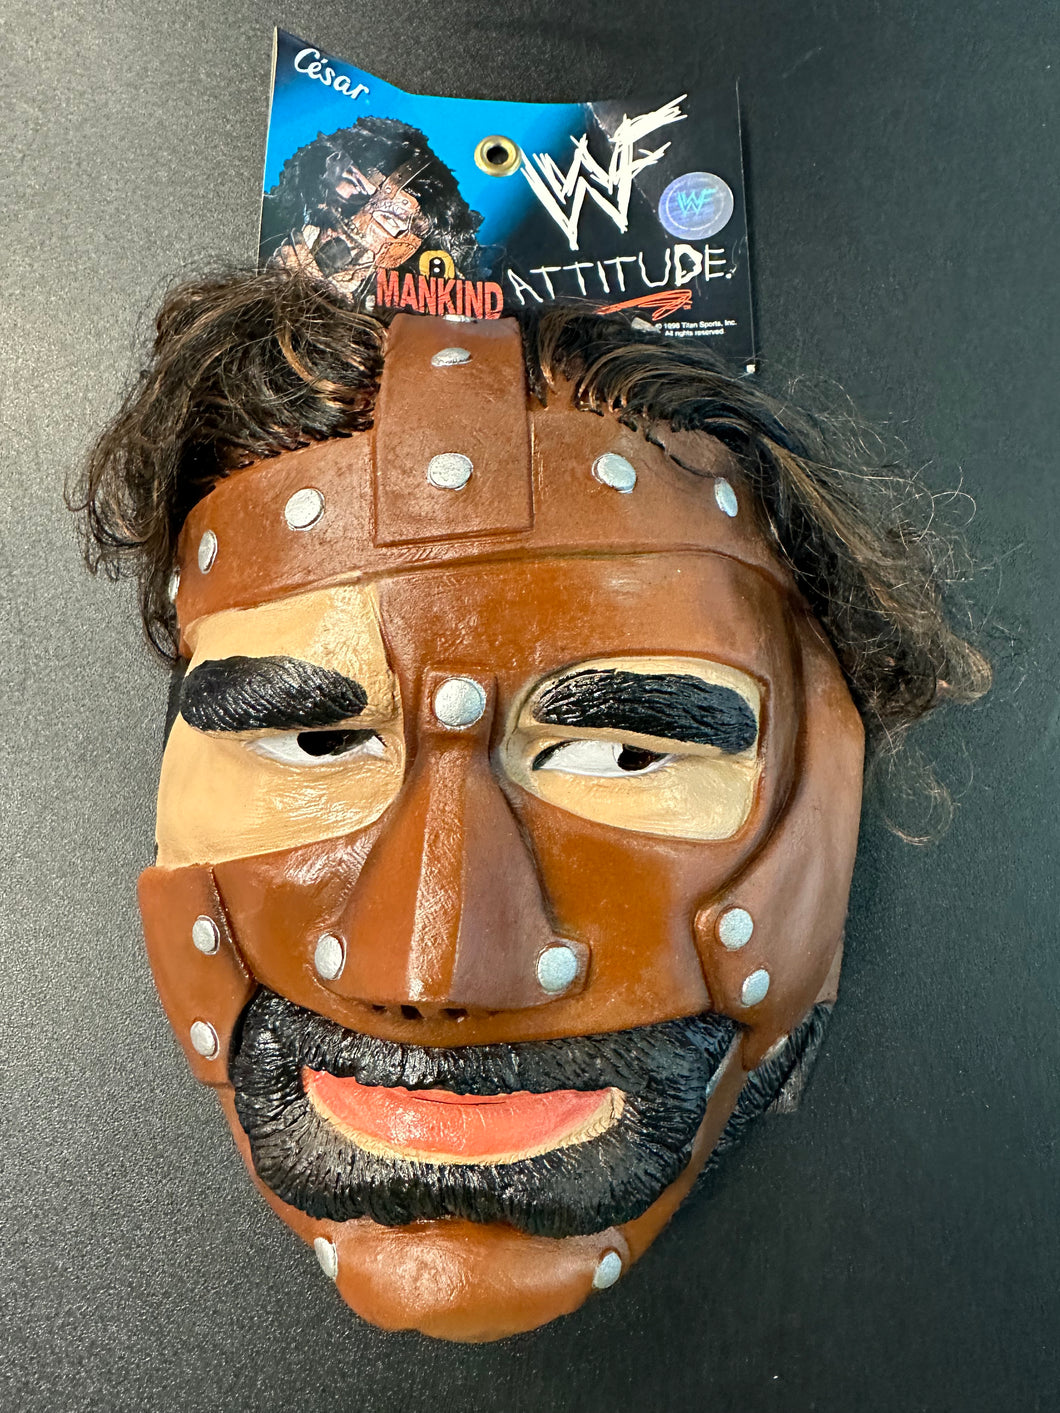 CESAR WWF ATTITUDE MANKIND MASK WITH HAIR 1998